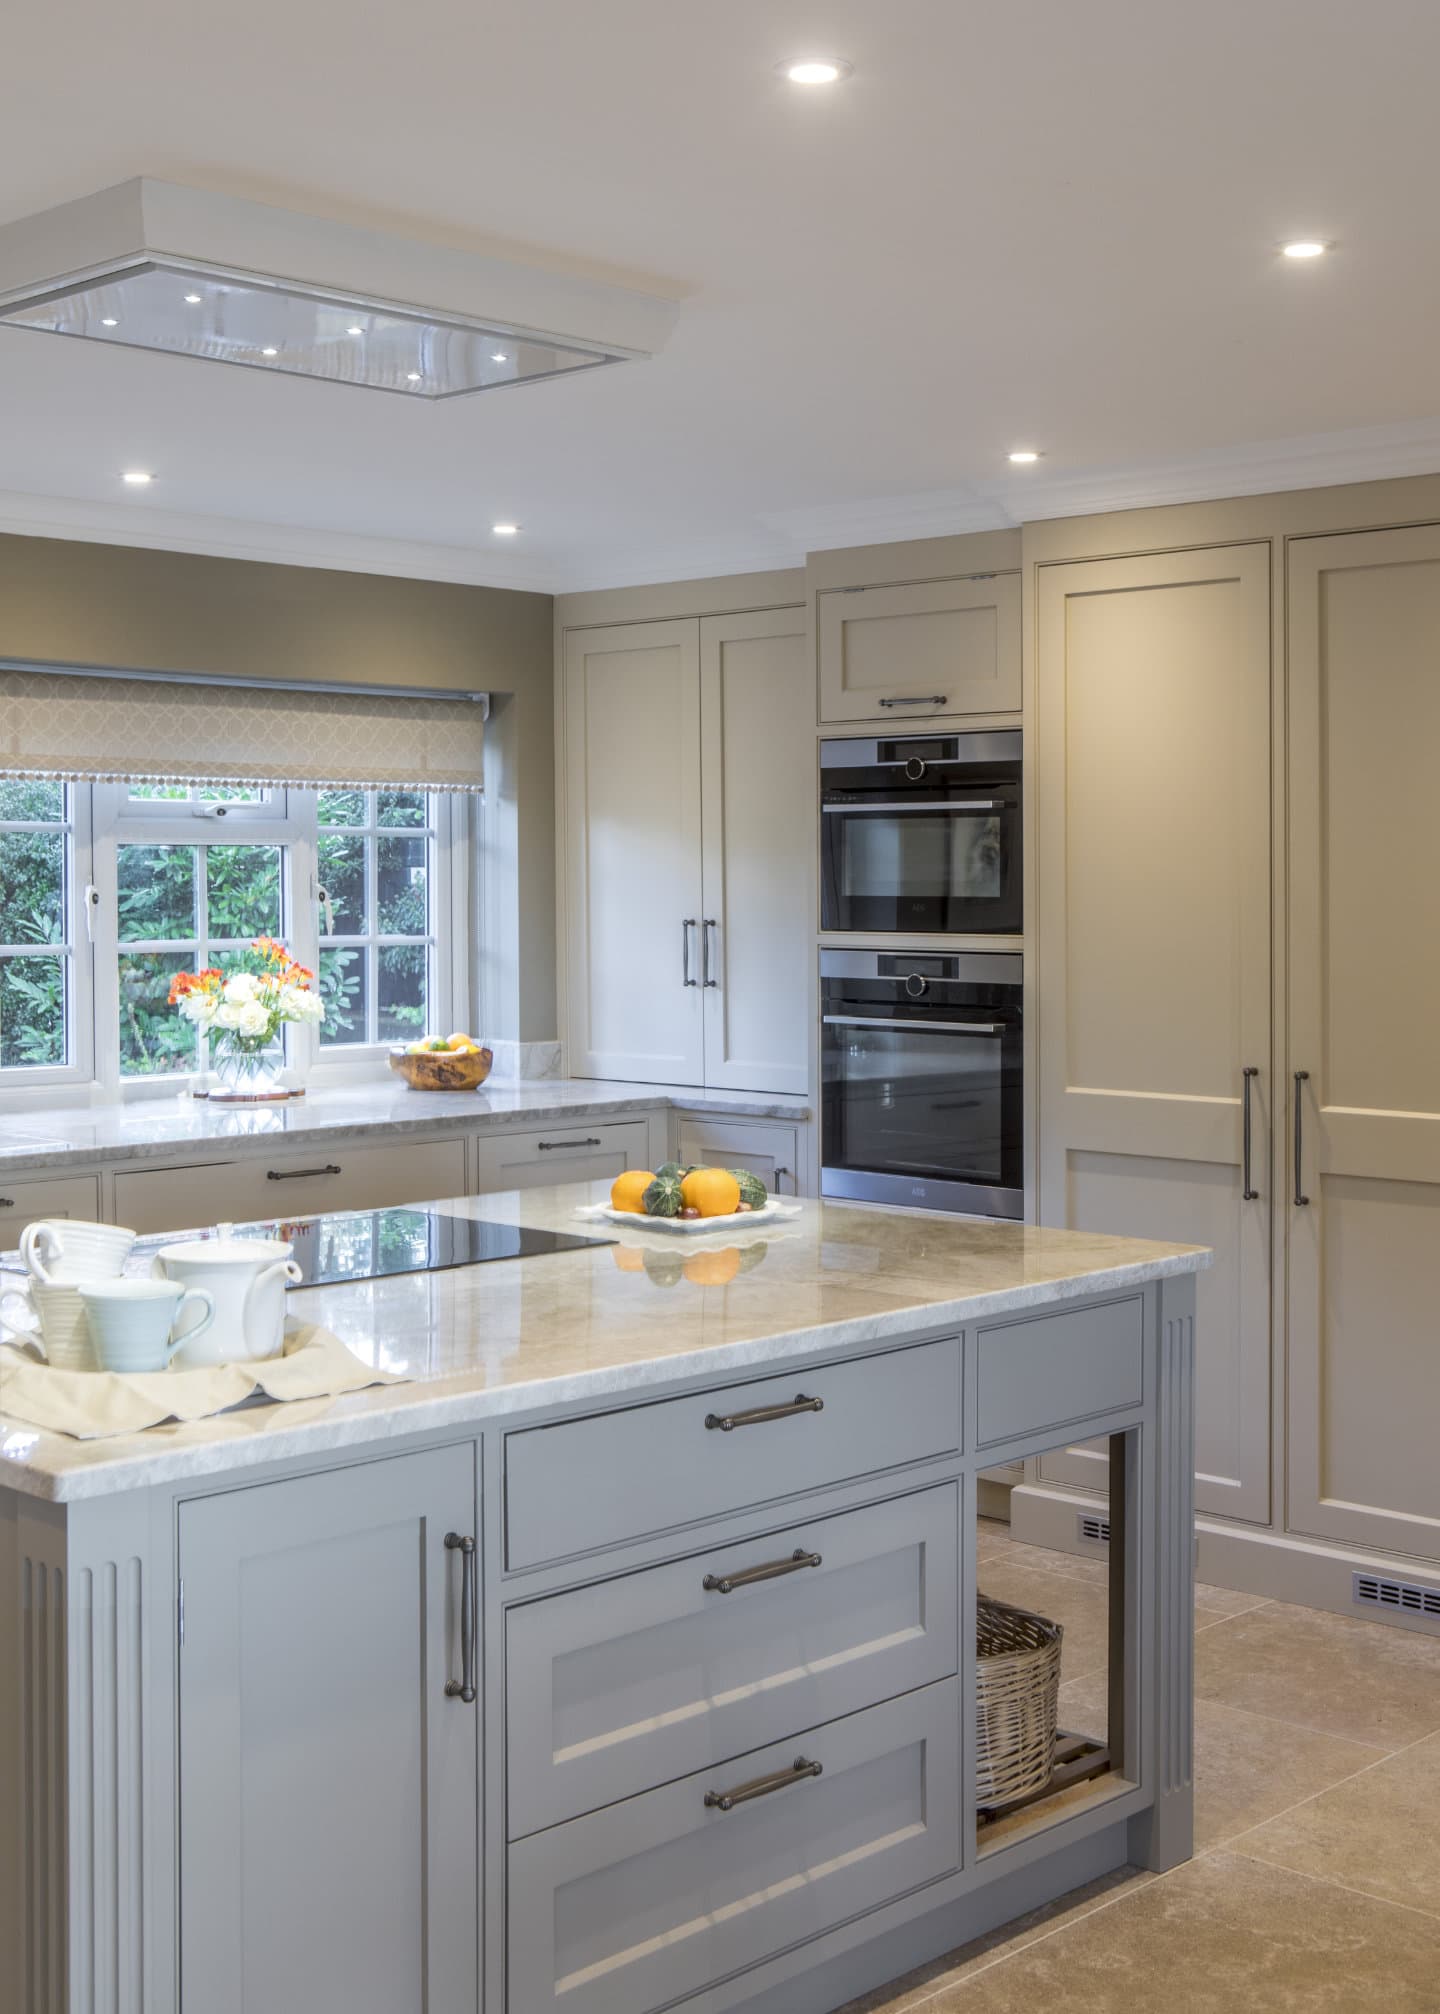 A view across a bespoke kitchen showing beautiful counter tops and fitted cupboards.